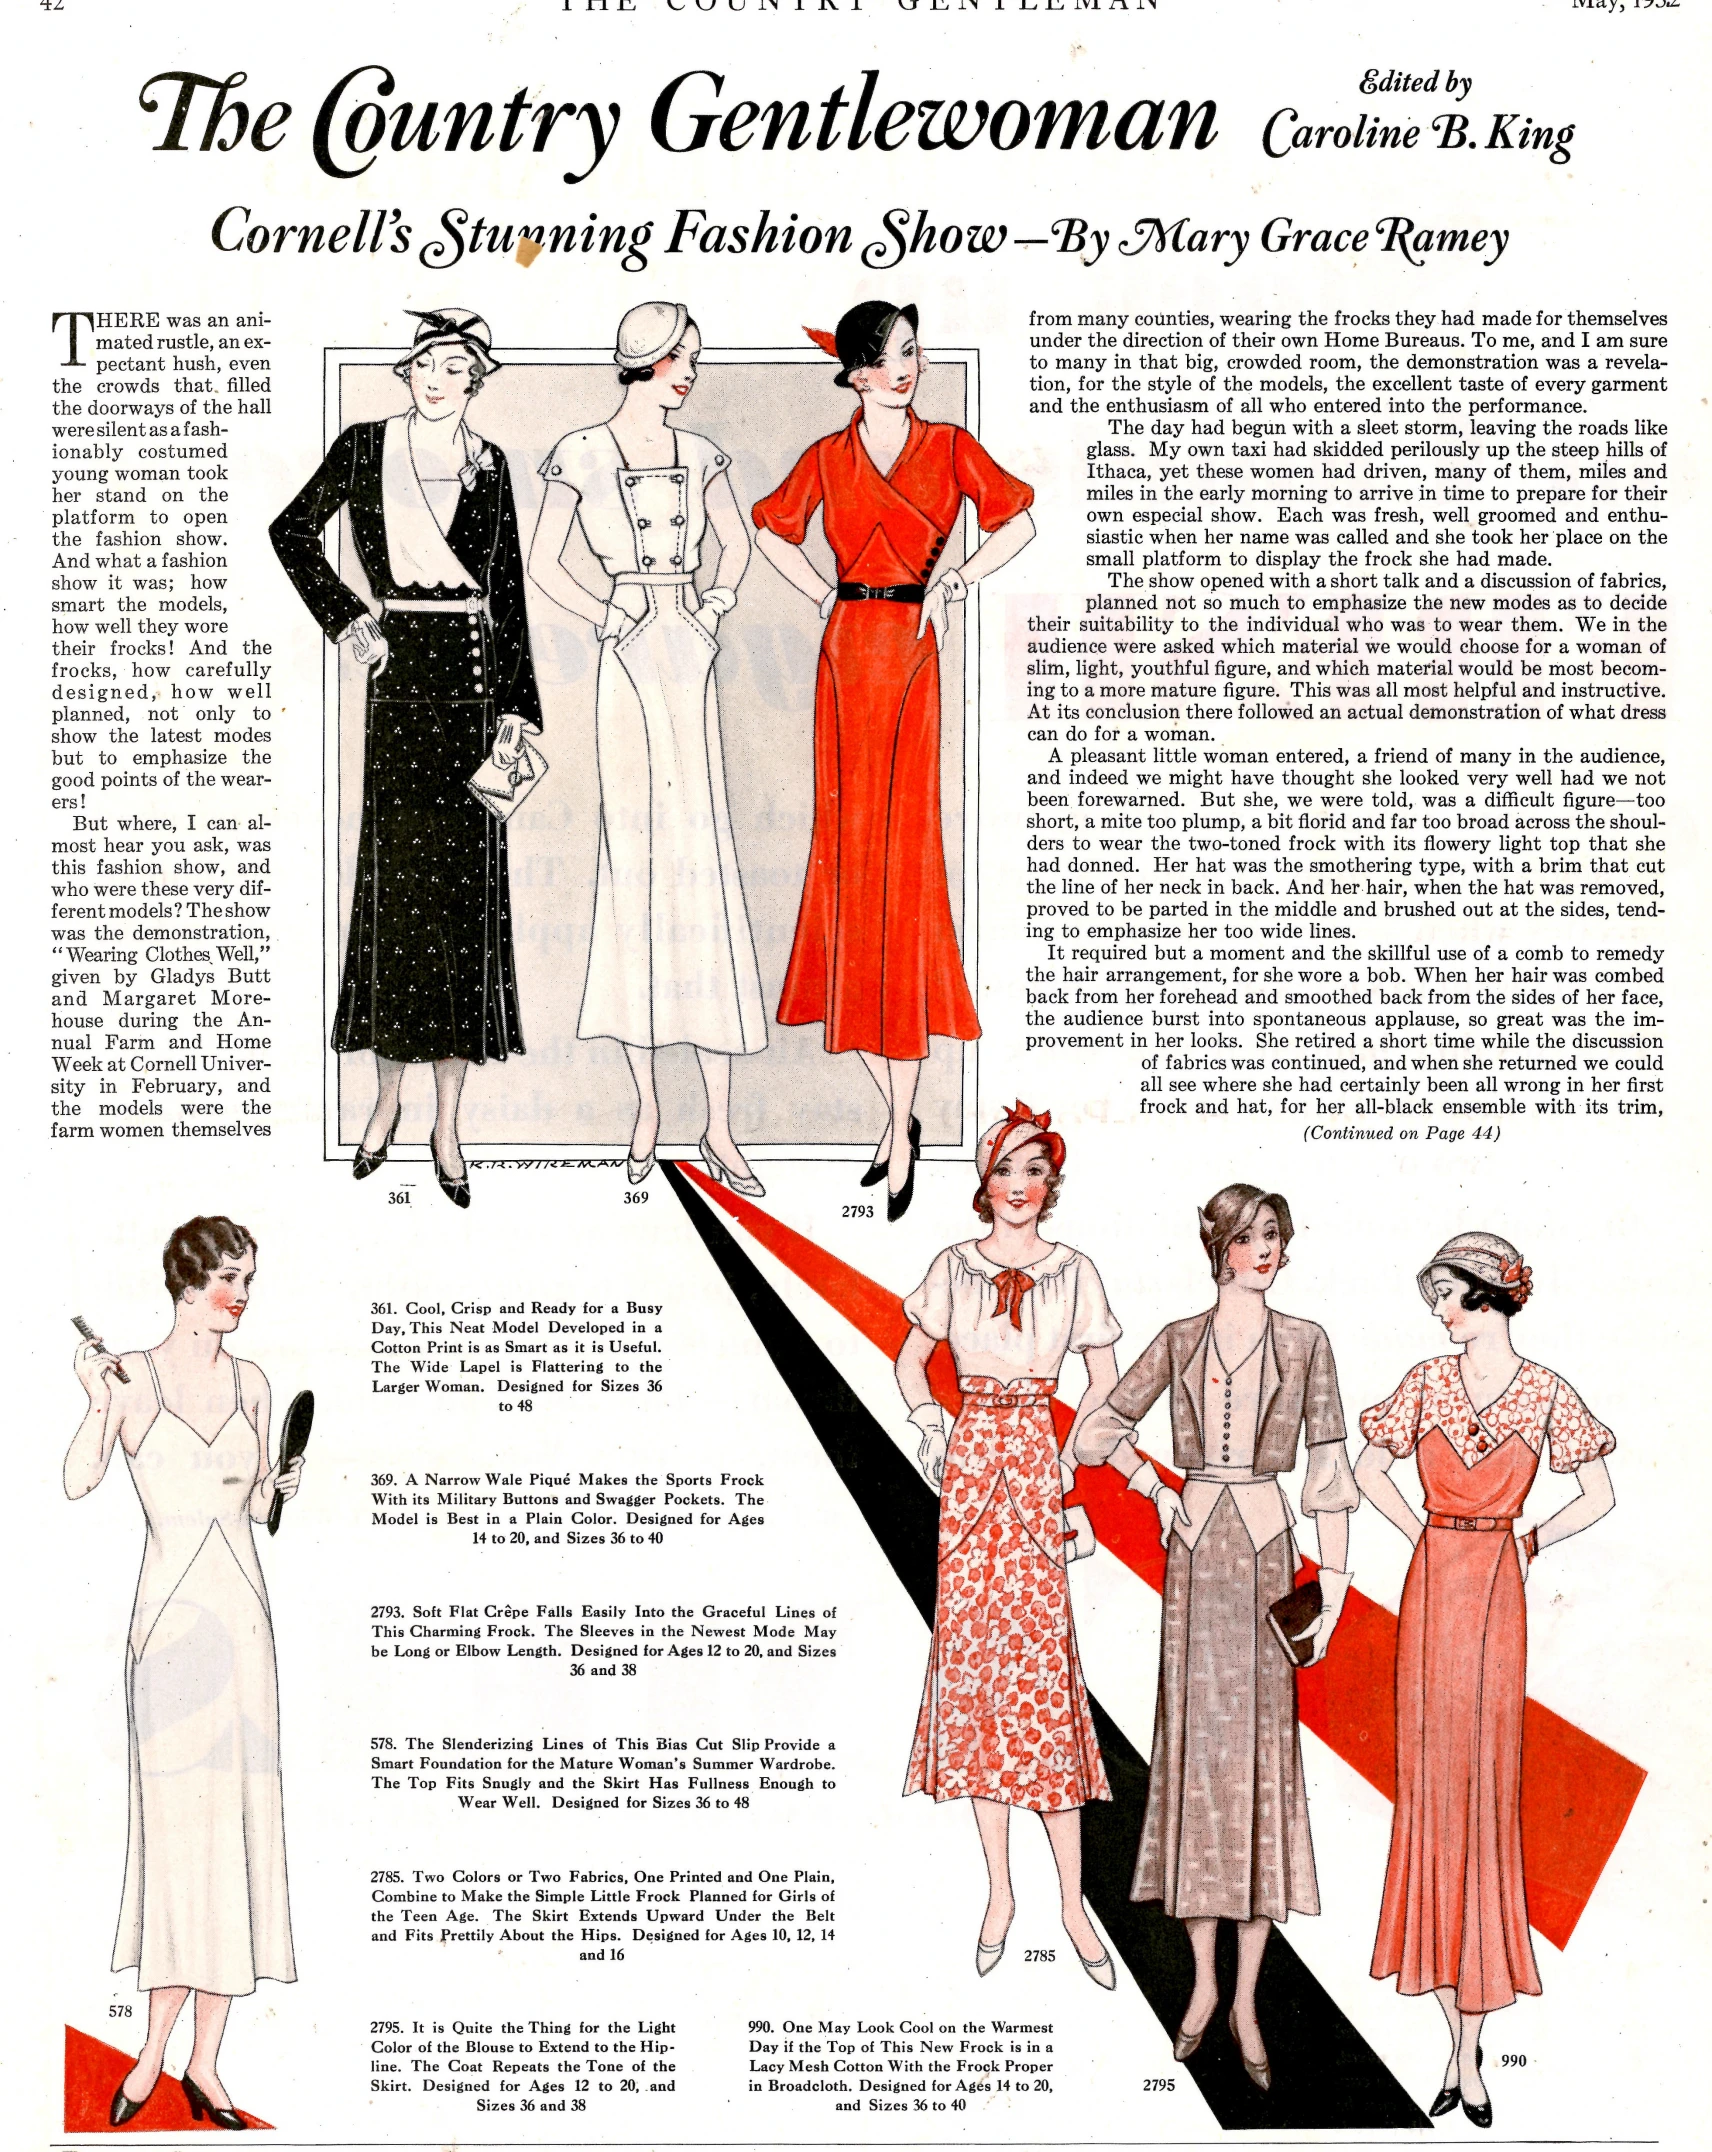 a poster with ladies'clothing and their outfits